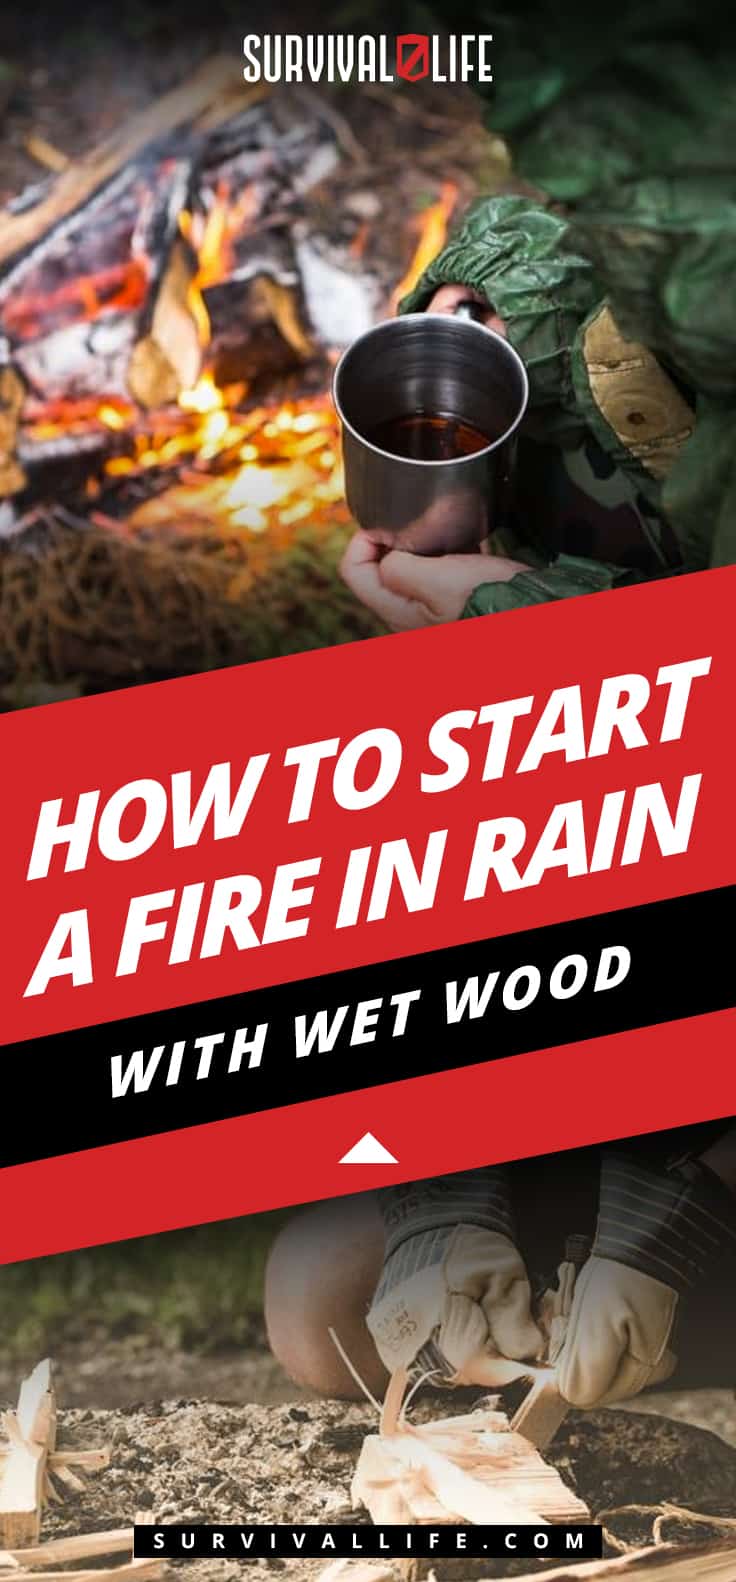 How To Start A Fire In Rain With Wet Wood